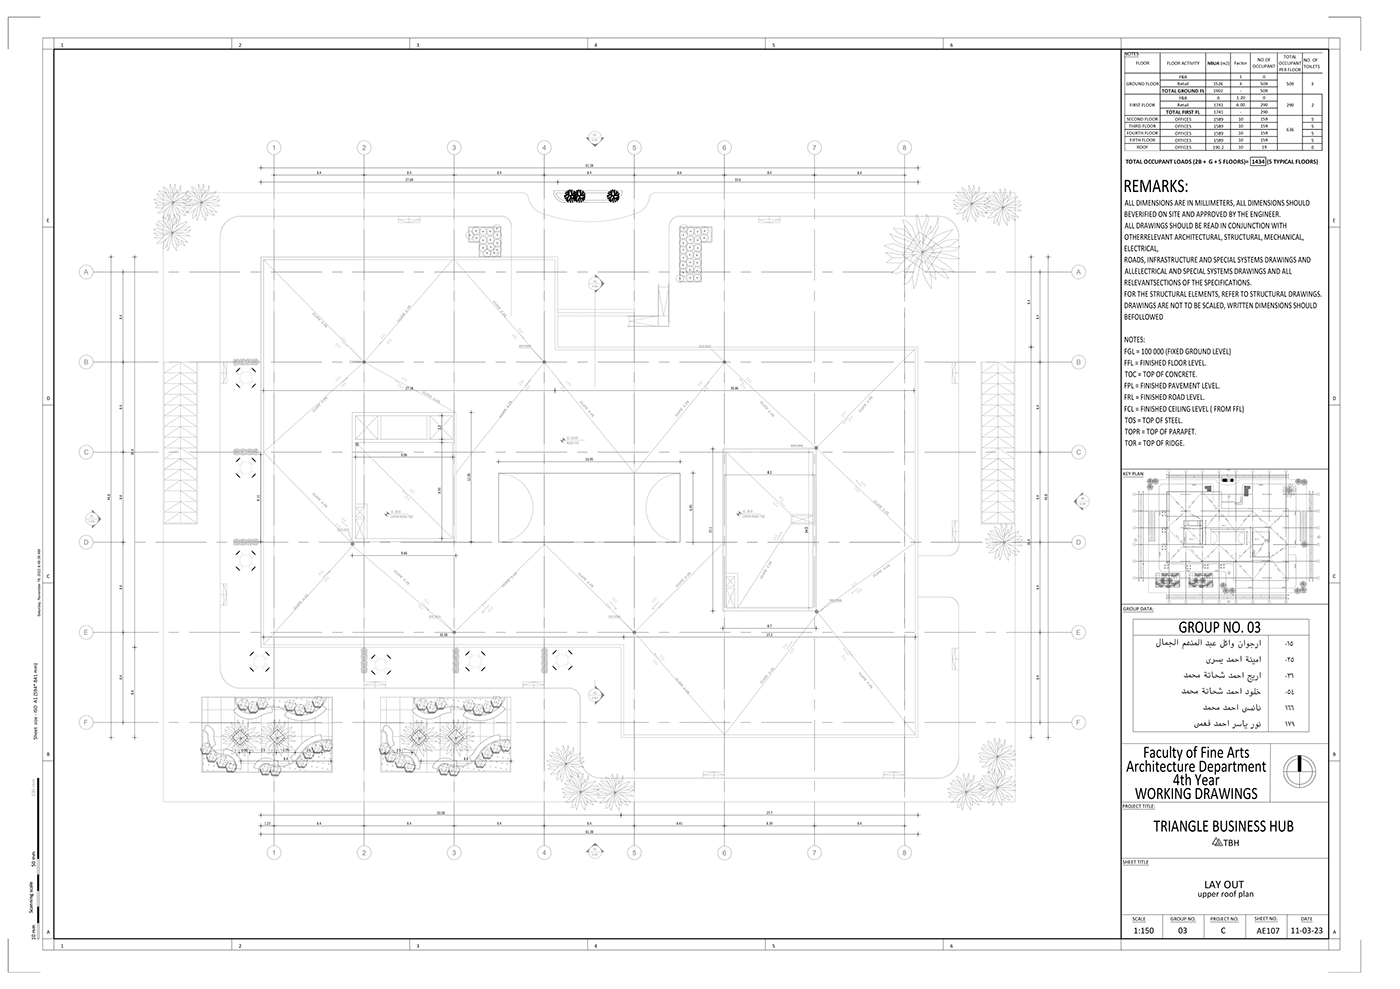 design logo shots tecnical drawing working drawings cad revit AutoCAD Render architecture